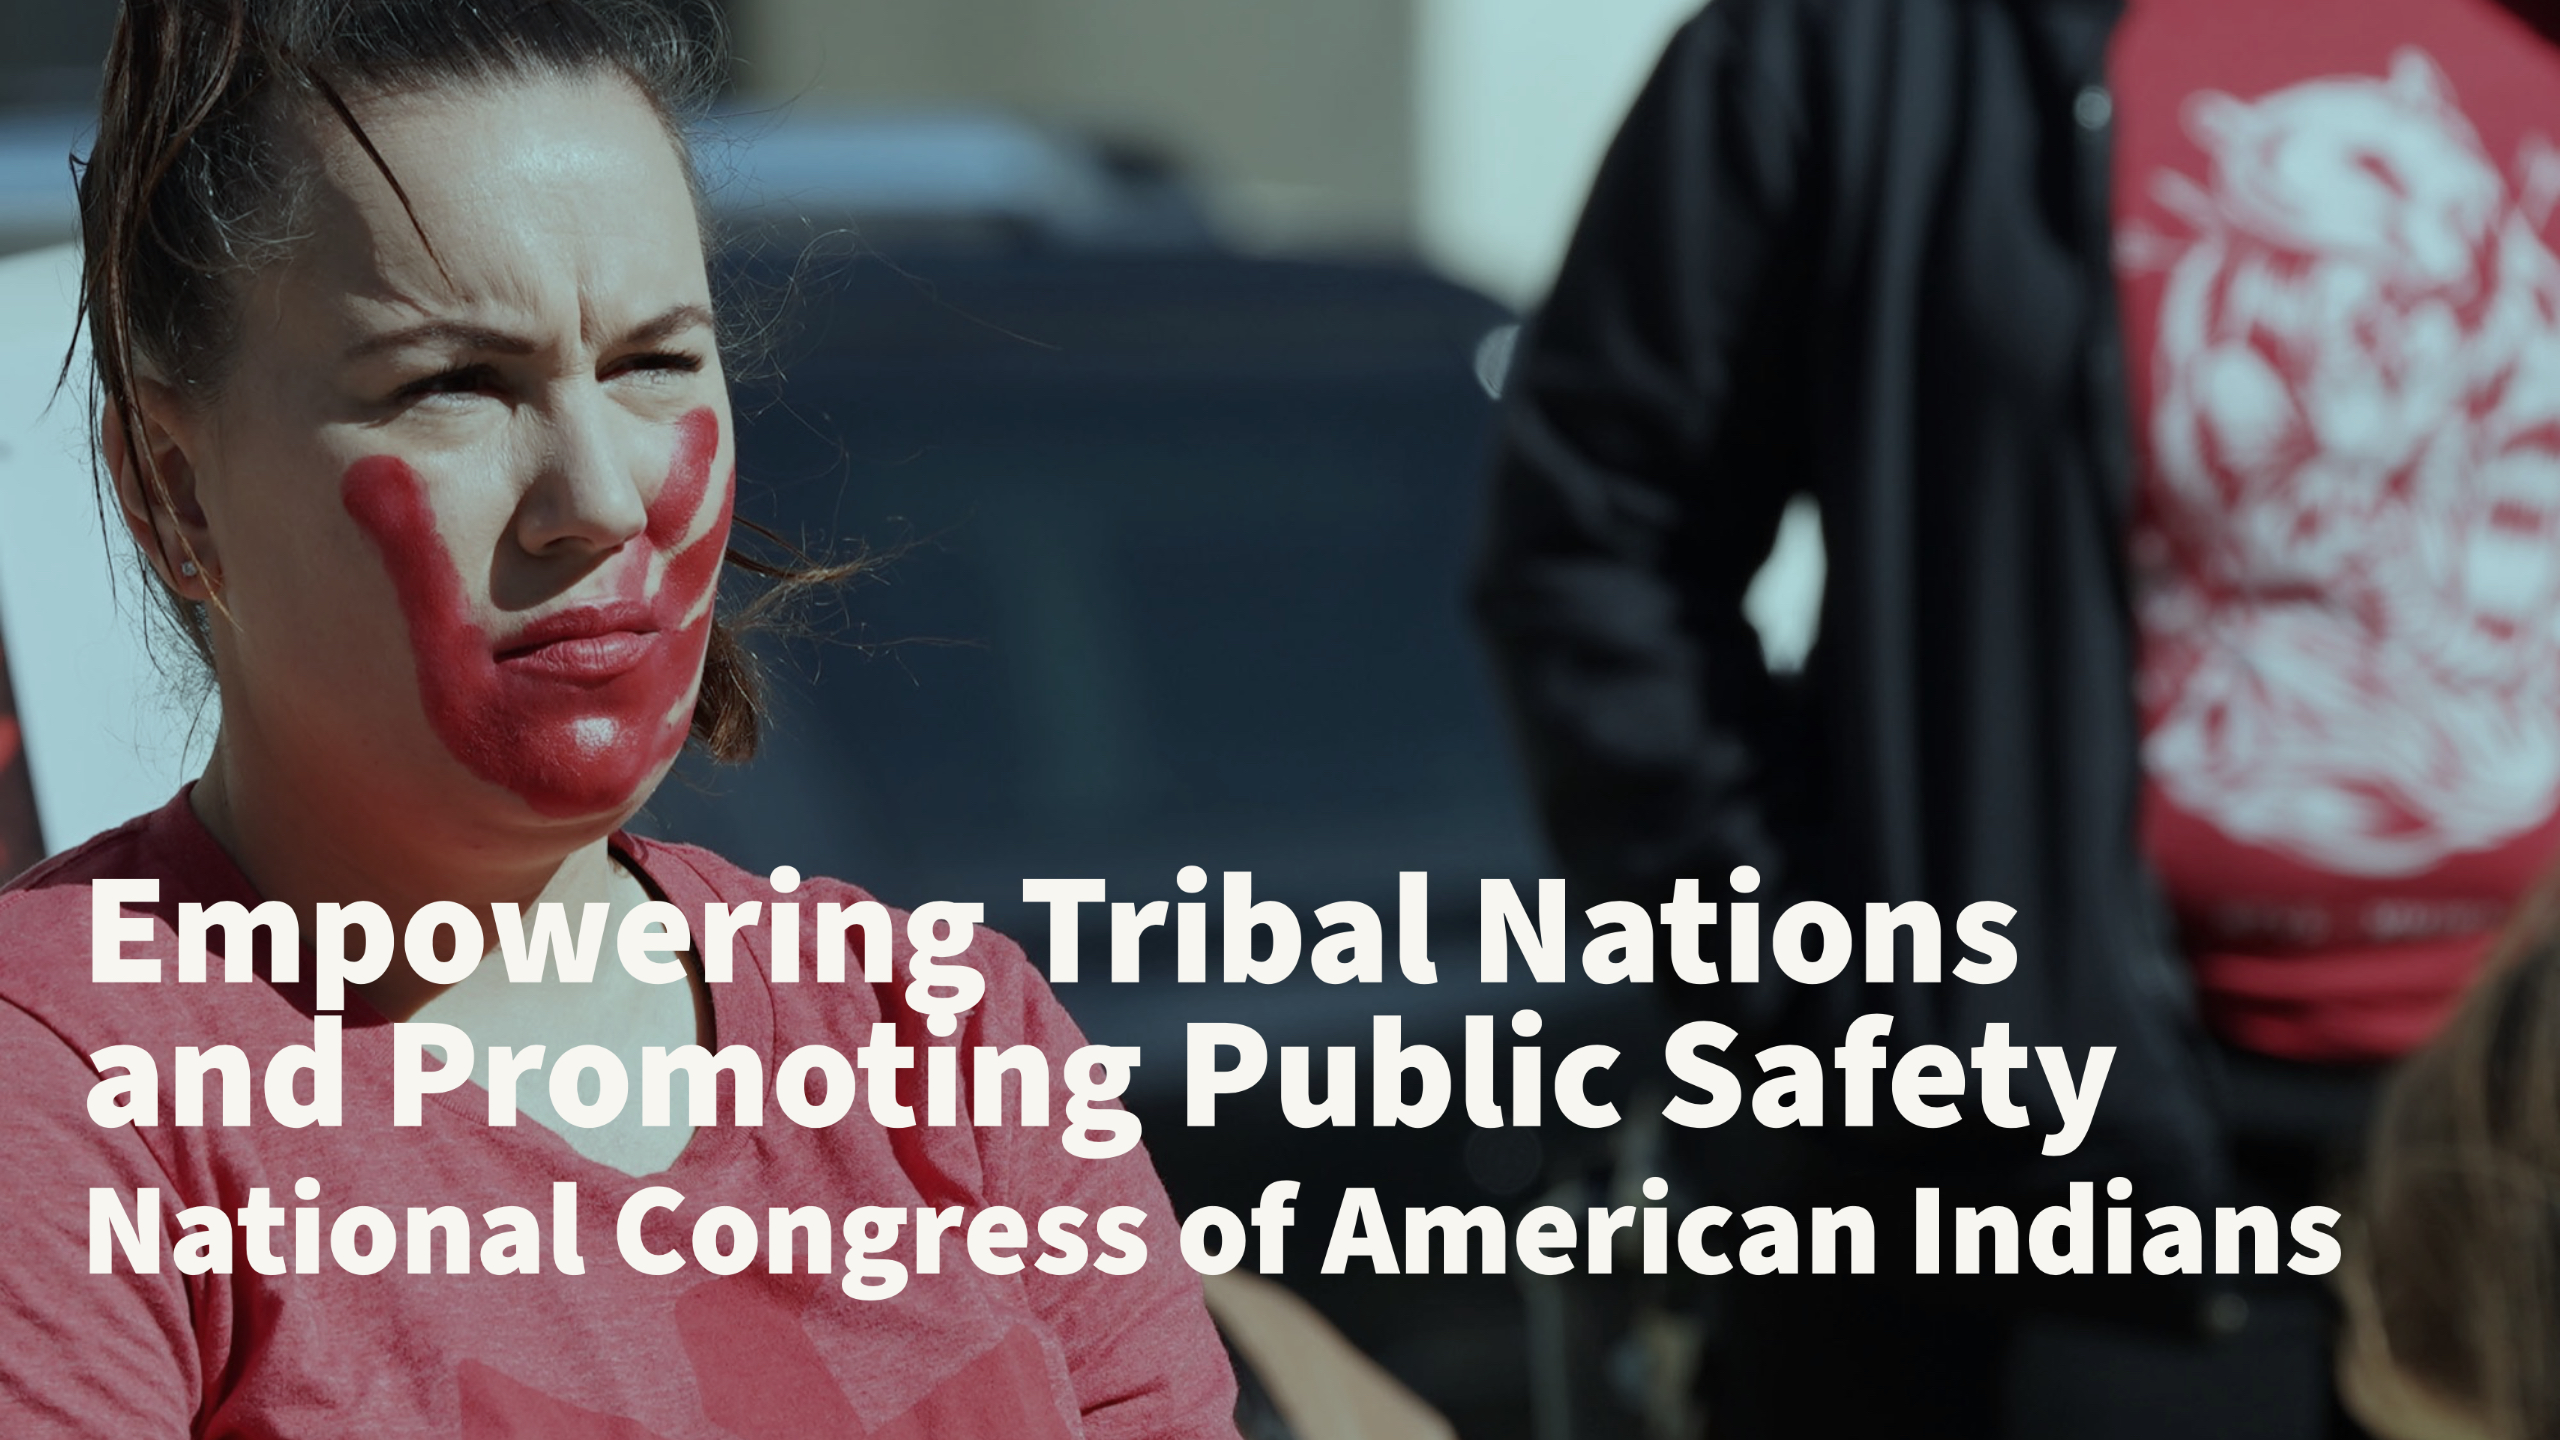 VAWA: Empowering Tribal Nations and Promoting Public Safety